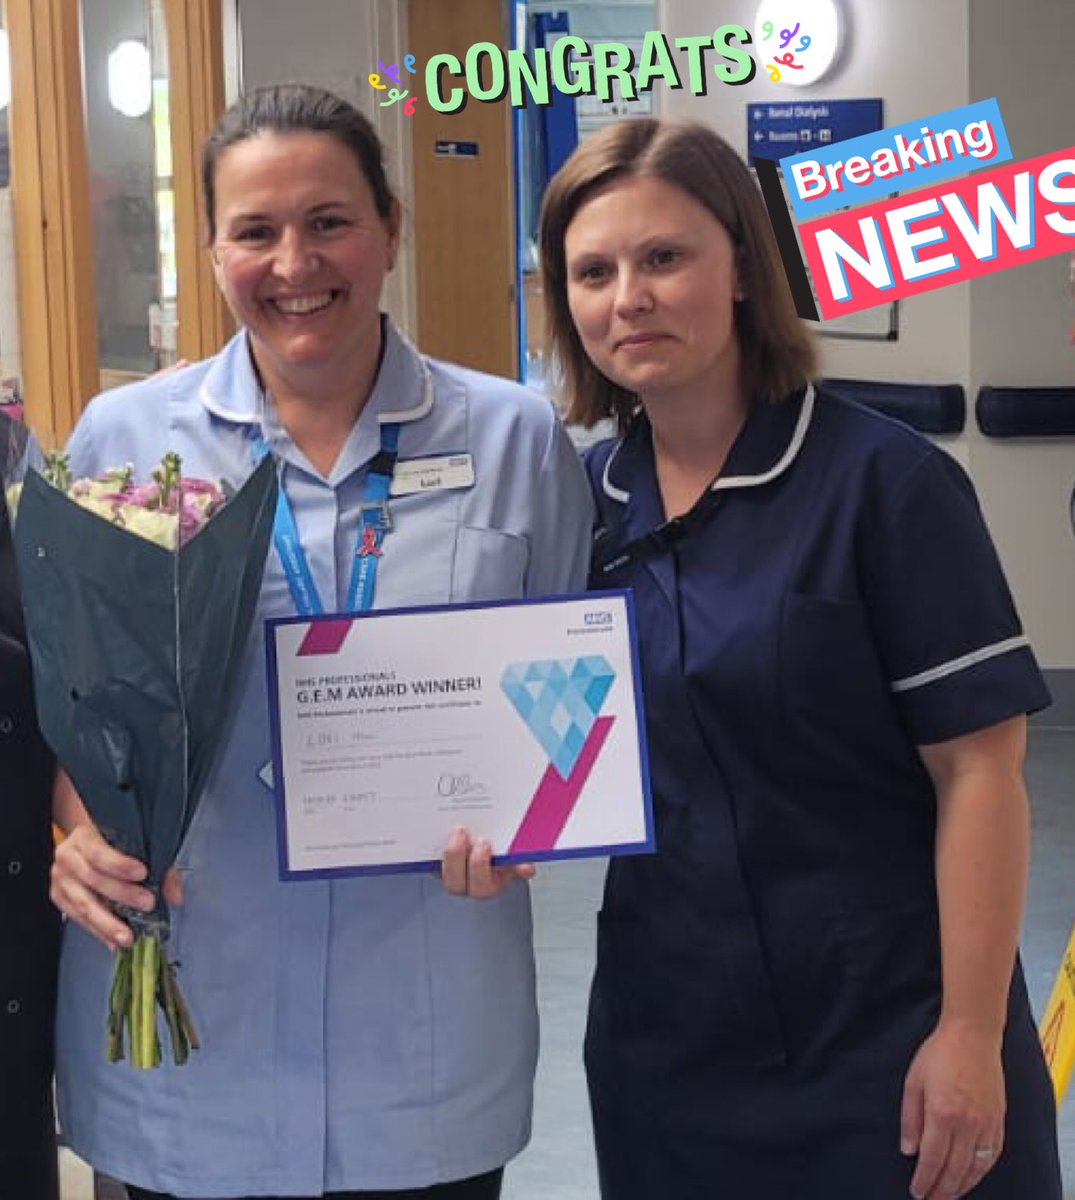 #nhsprofessionals G.E.M award goes to @lorihilly78 
Well deserved Lori!!! 
#NHS #goingtheextramile #teamwork @Team_ESNEFT